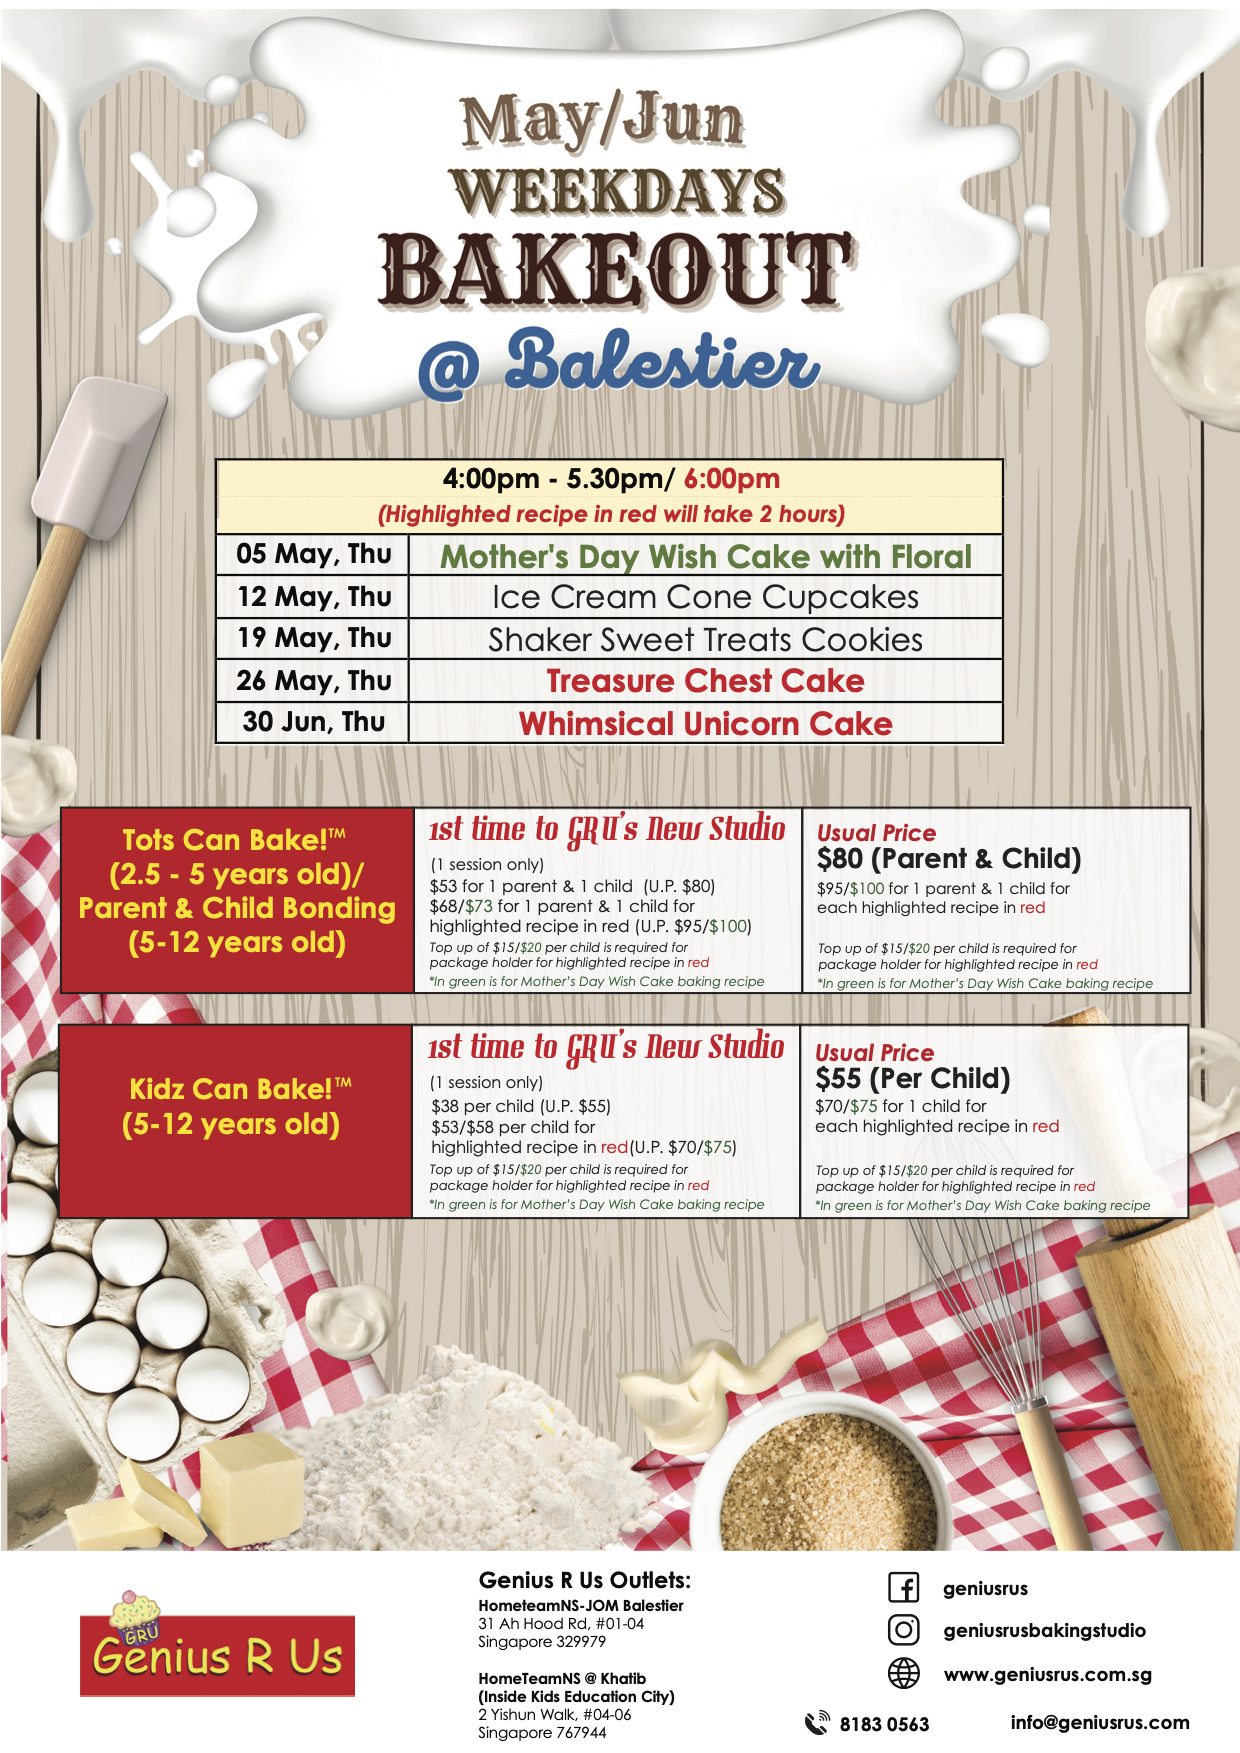 May & June Weekdays Bakeout @ Balestier; 